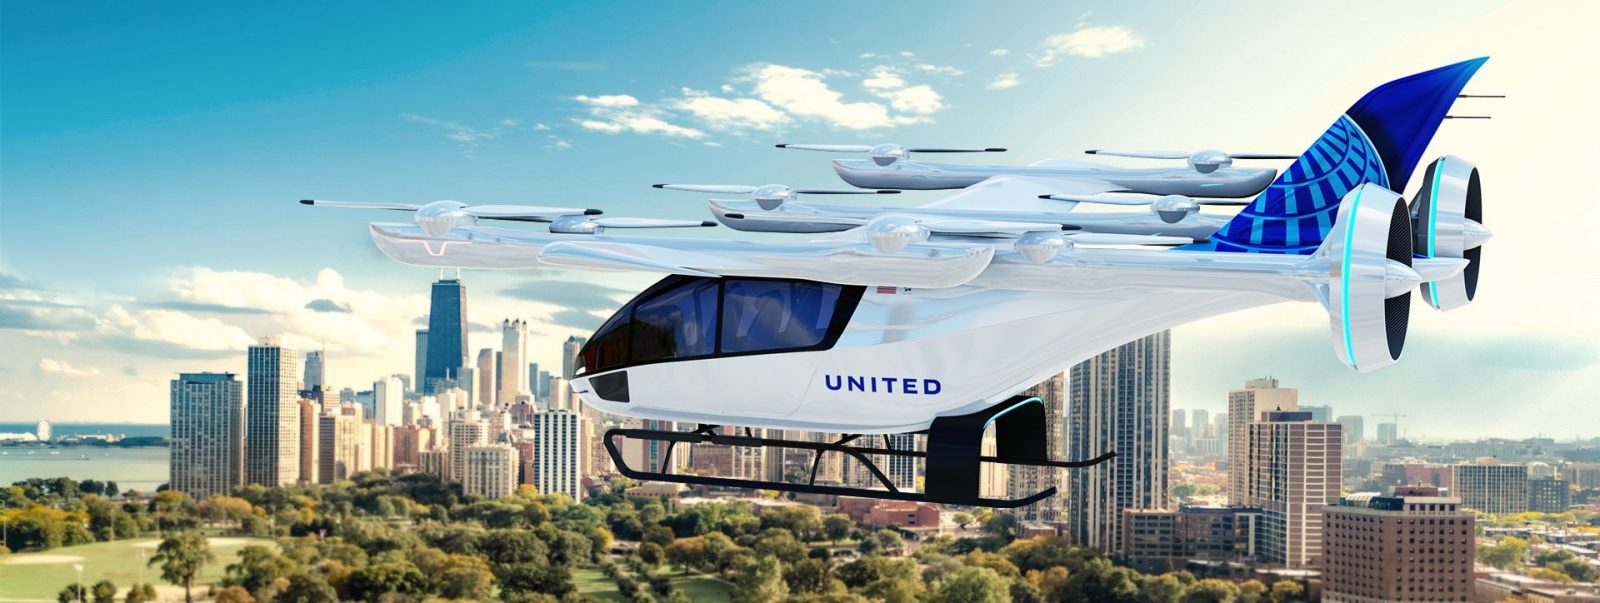 United adds Eve Mobility as AAM partner in multimillion-dollar deal